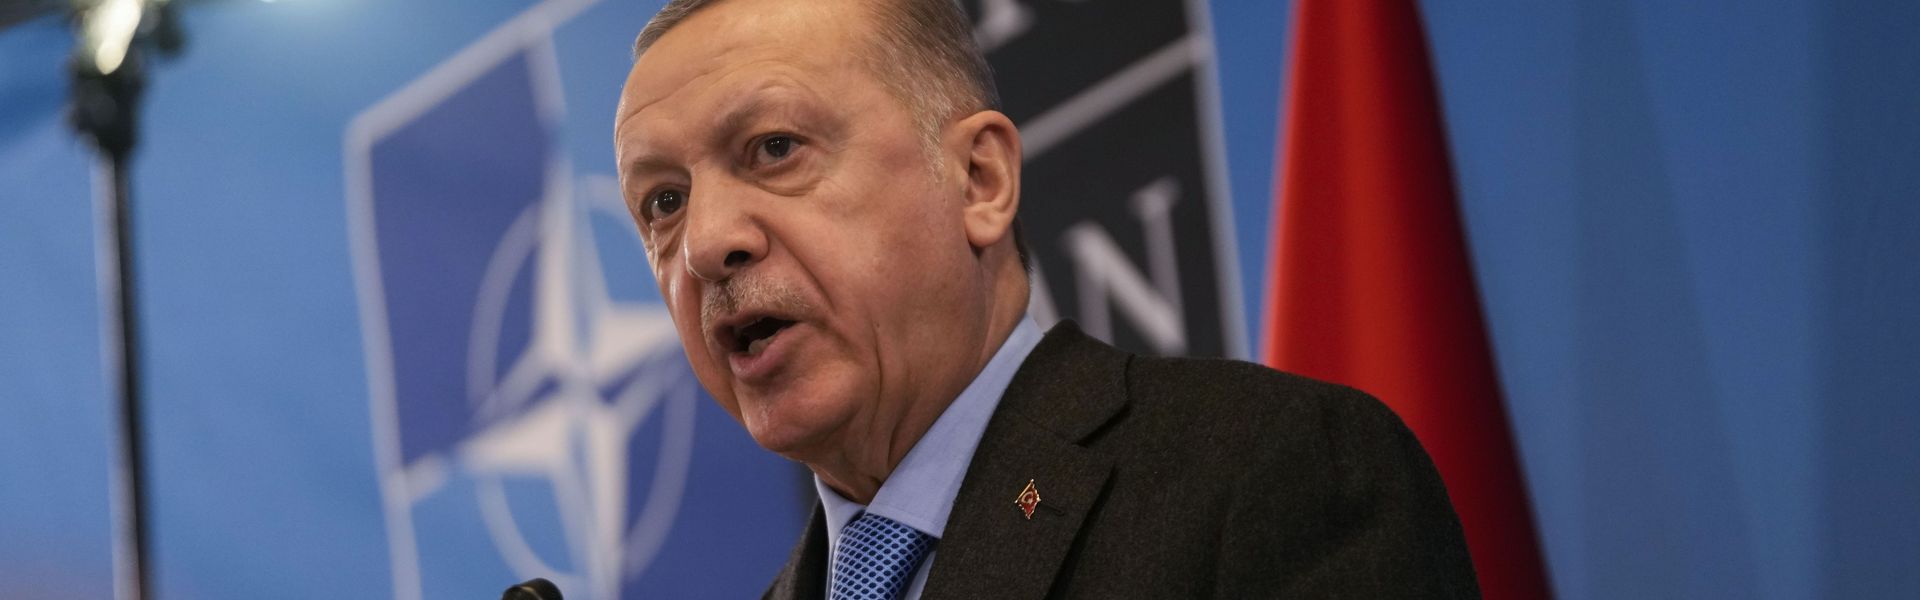 Turkish President Recep Tayyip Erdoğan speaks during a media conference at NATO headquarters in Brussels on March 24.